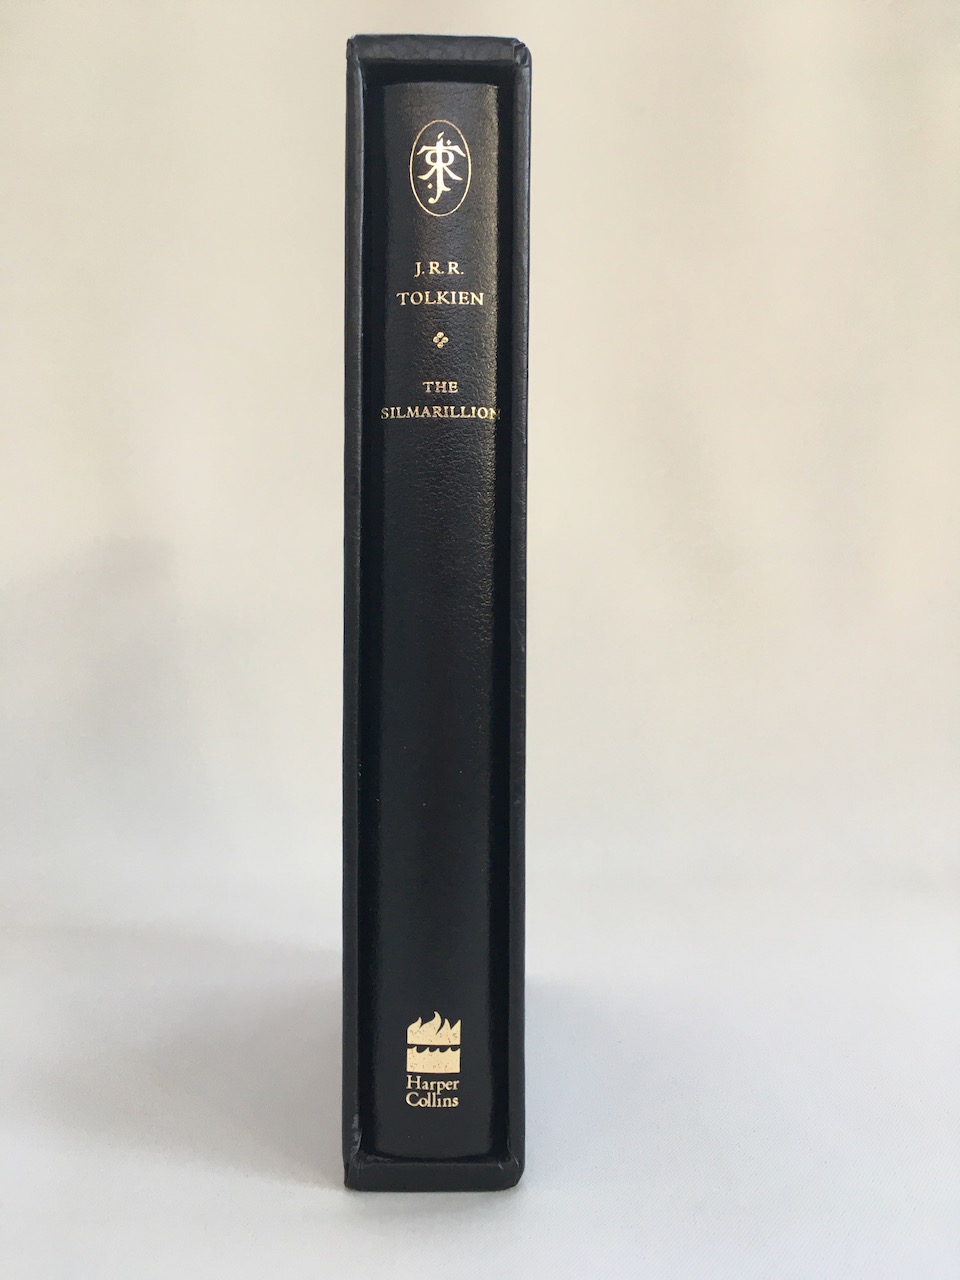 
Black Limited De Luxe edition of the Silmarillion 2002 1